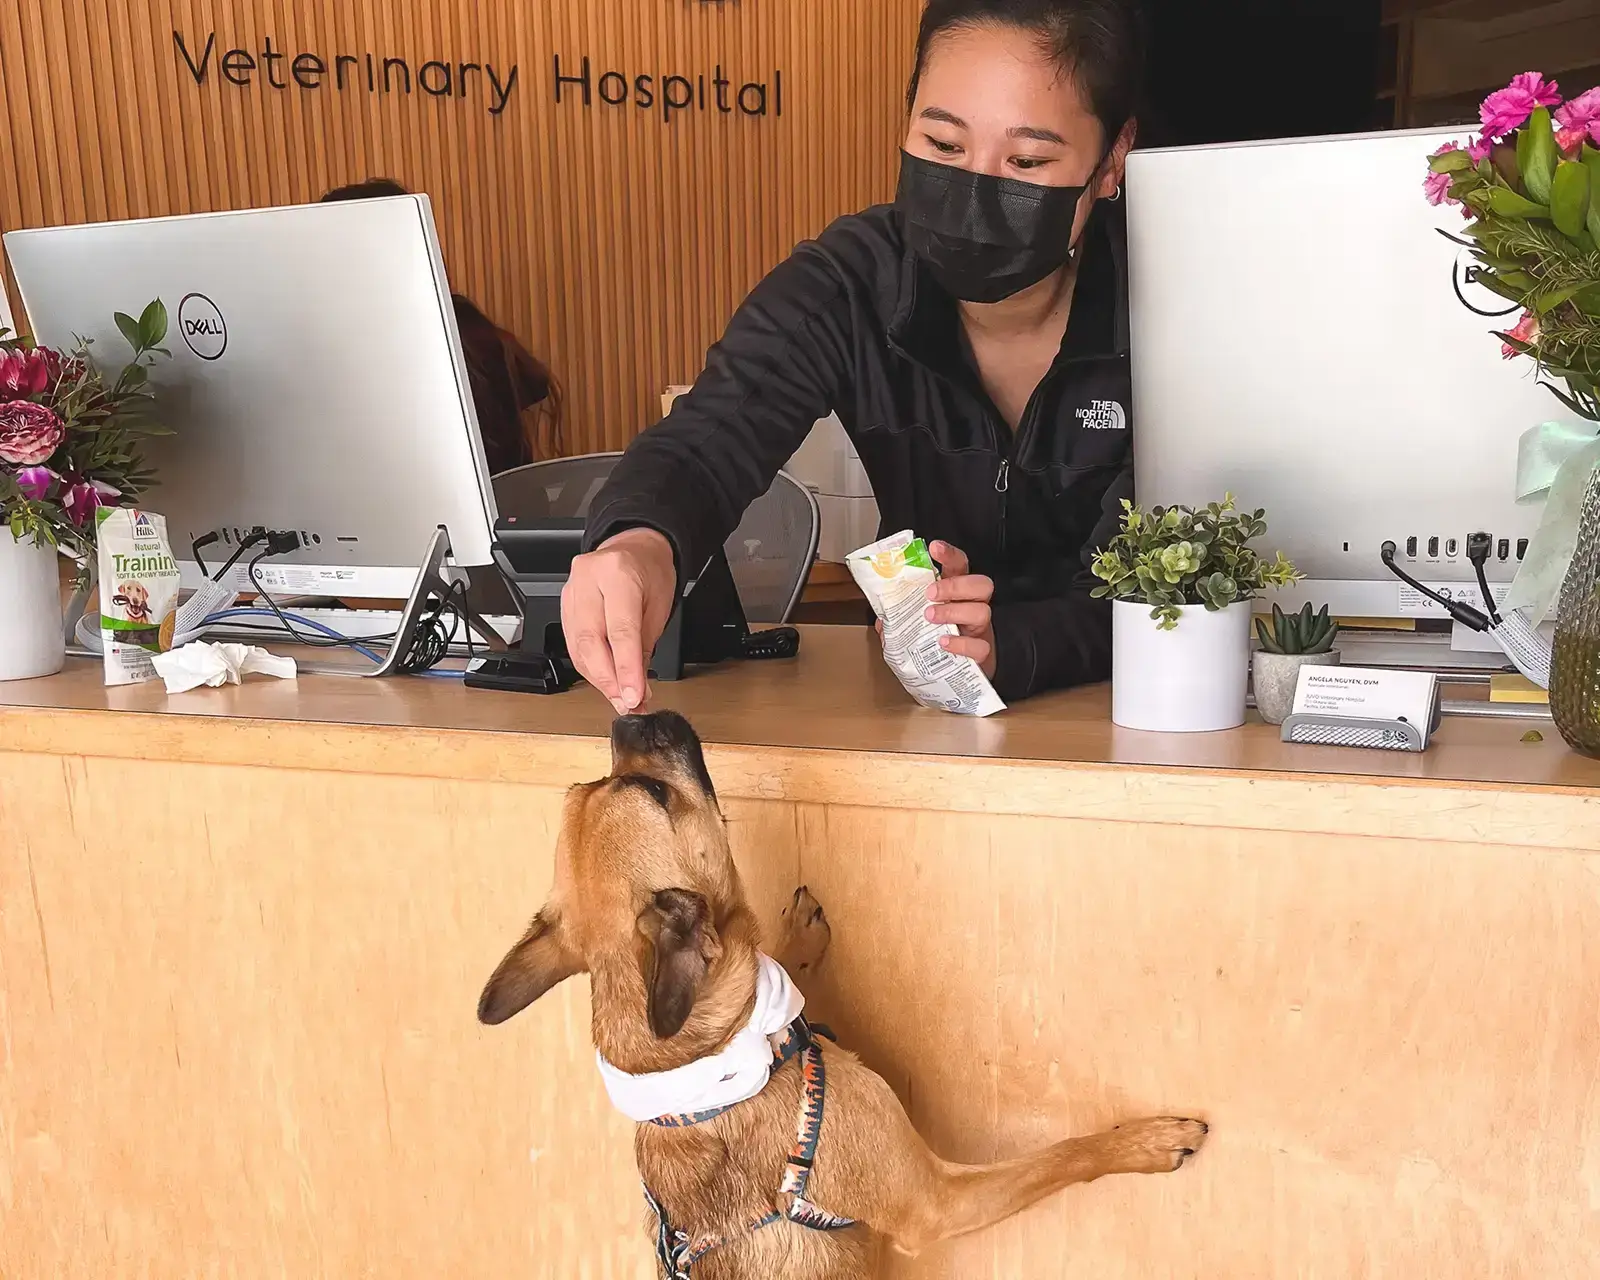 Brown French bulldog mix being fed treats by staff in clinic lobby